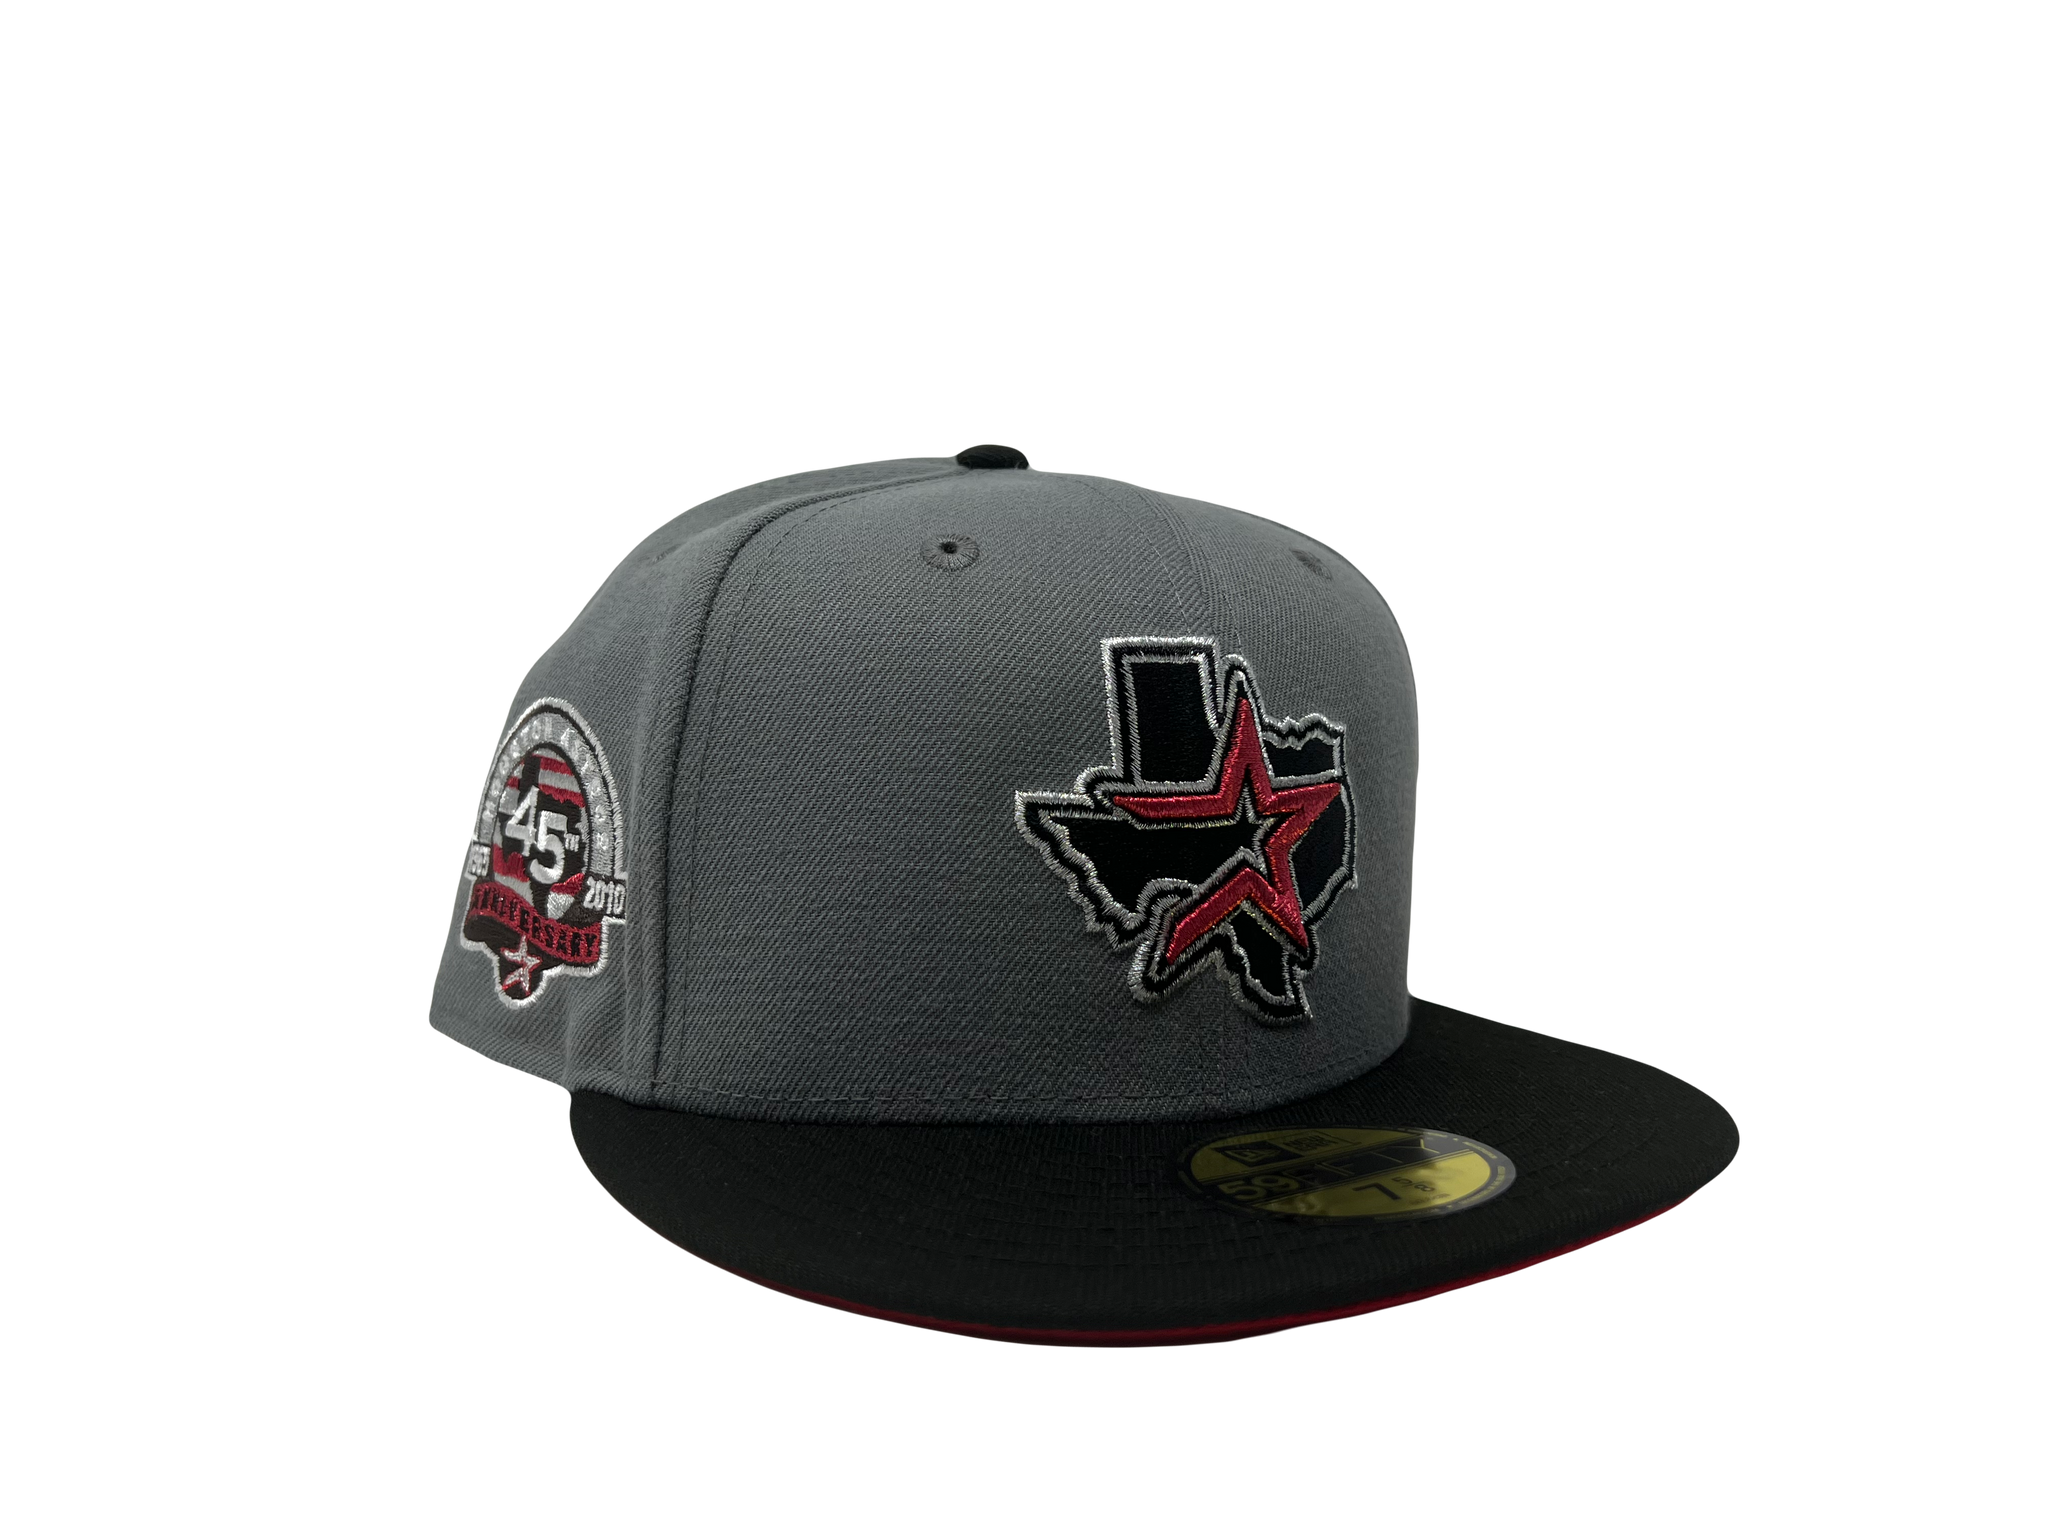 Houston Astros 45th Anniversary Red Brim New Era Fitted Hat – Sports World  165